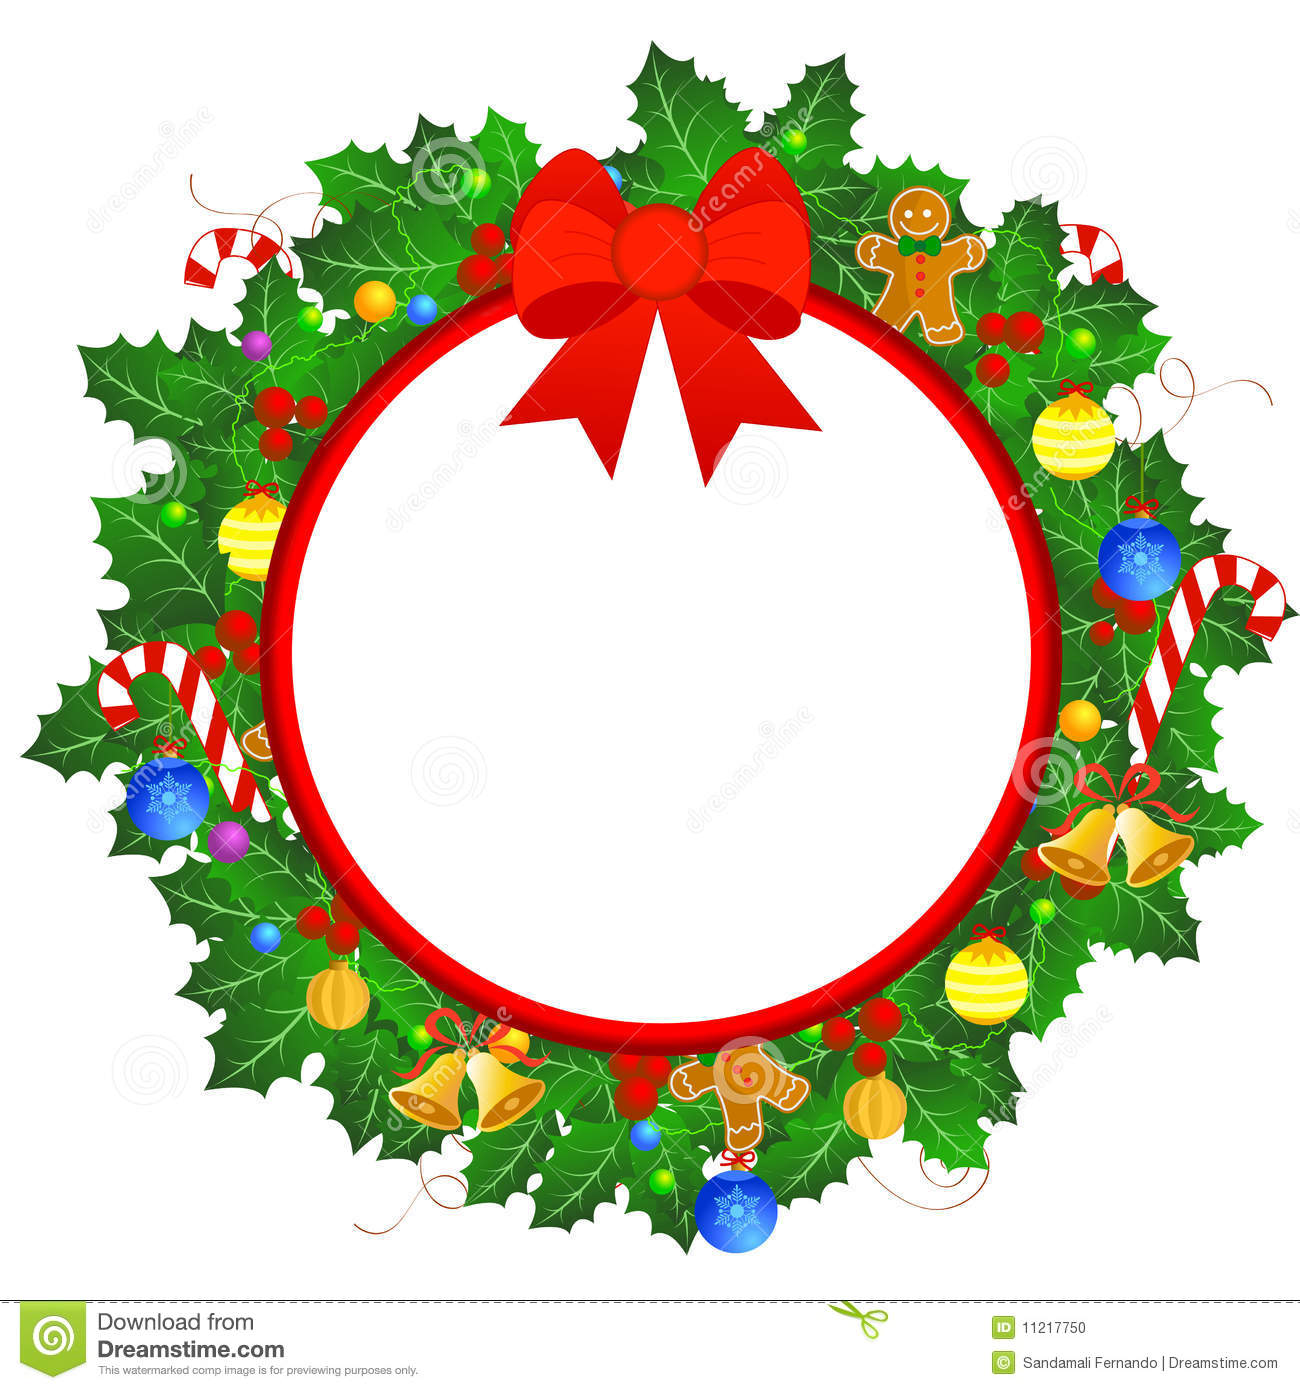 Beautiful Christmas Wreath Border With Colorful Christmas Ornaments